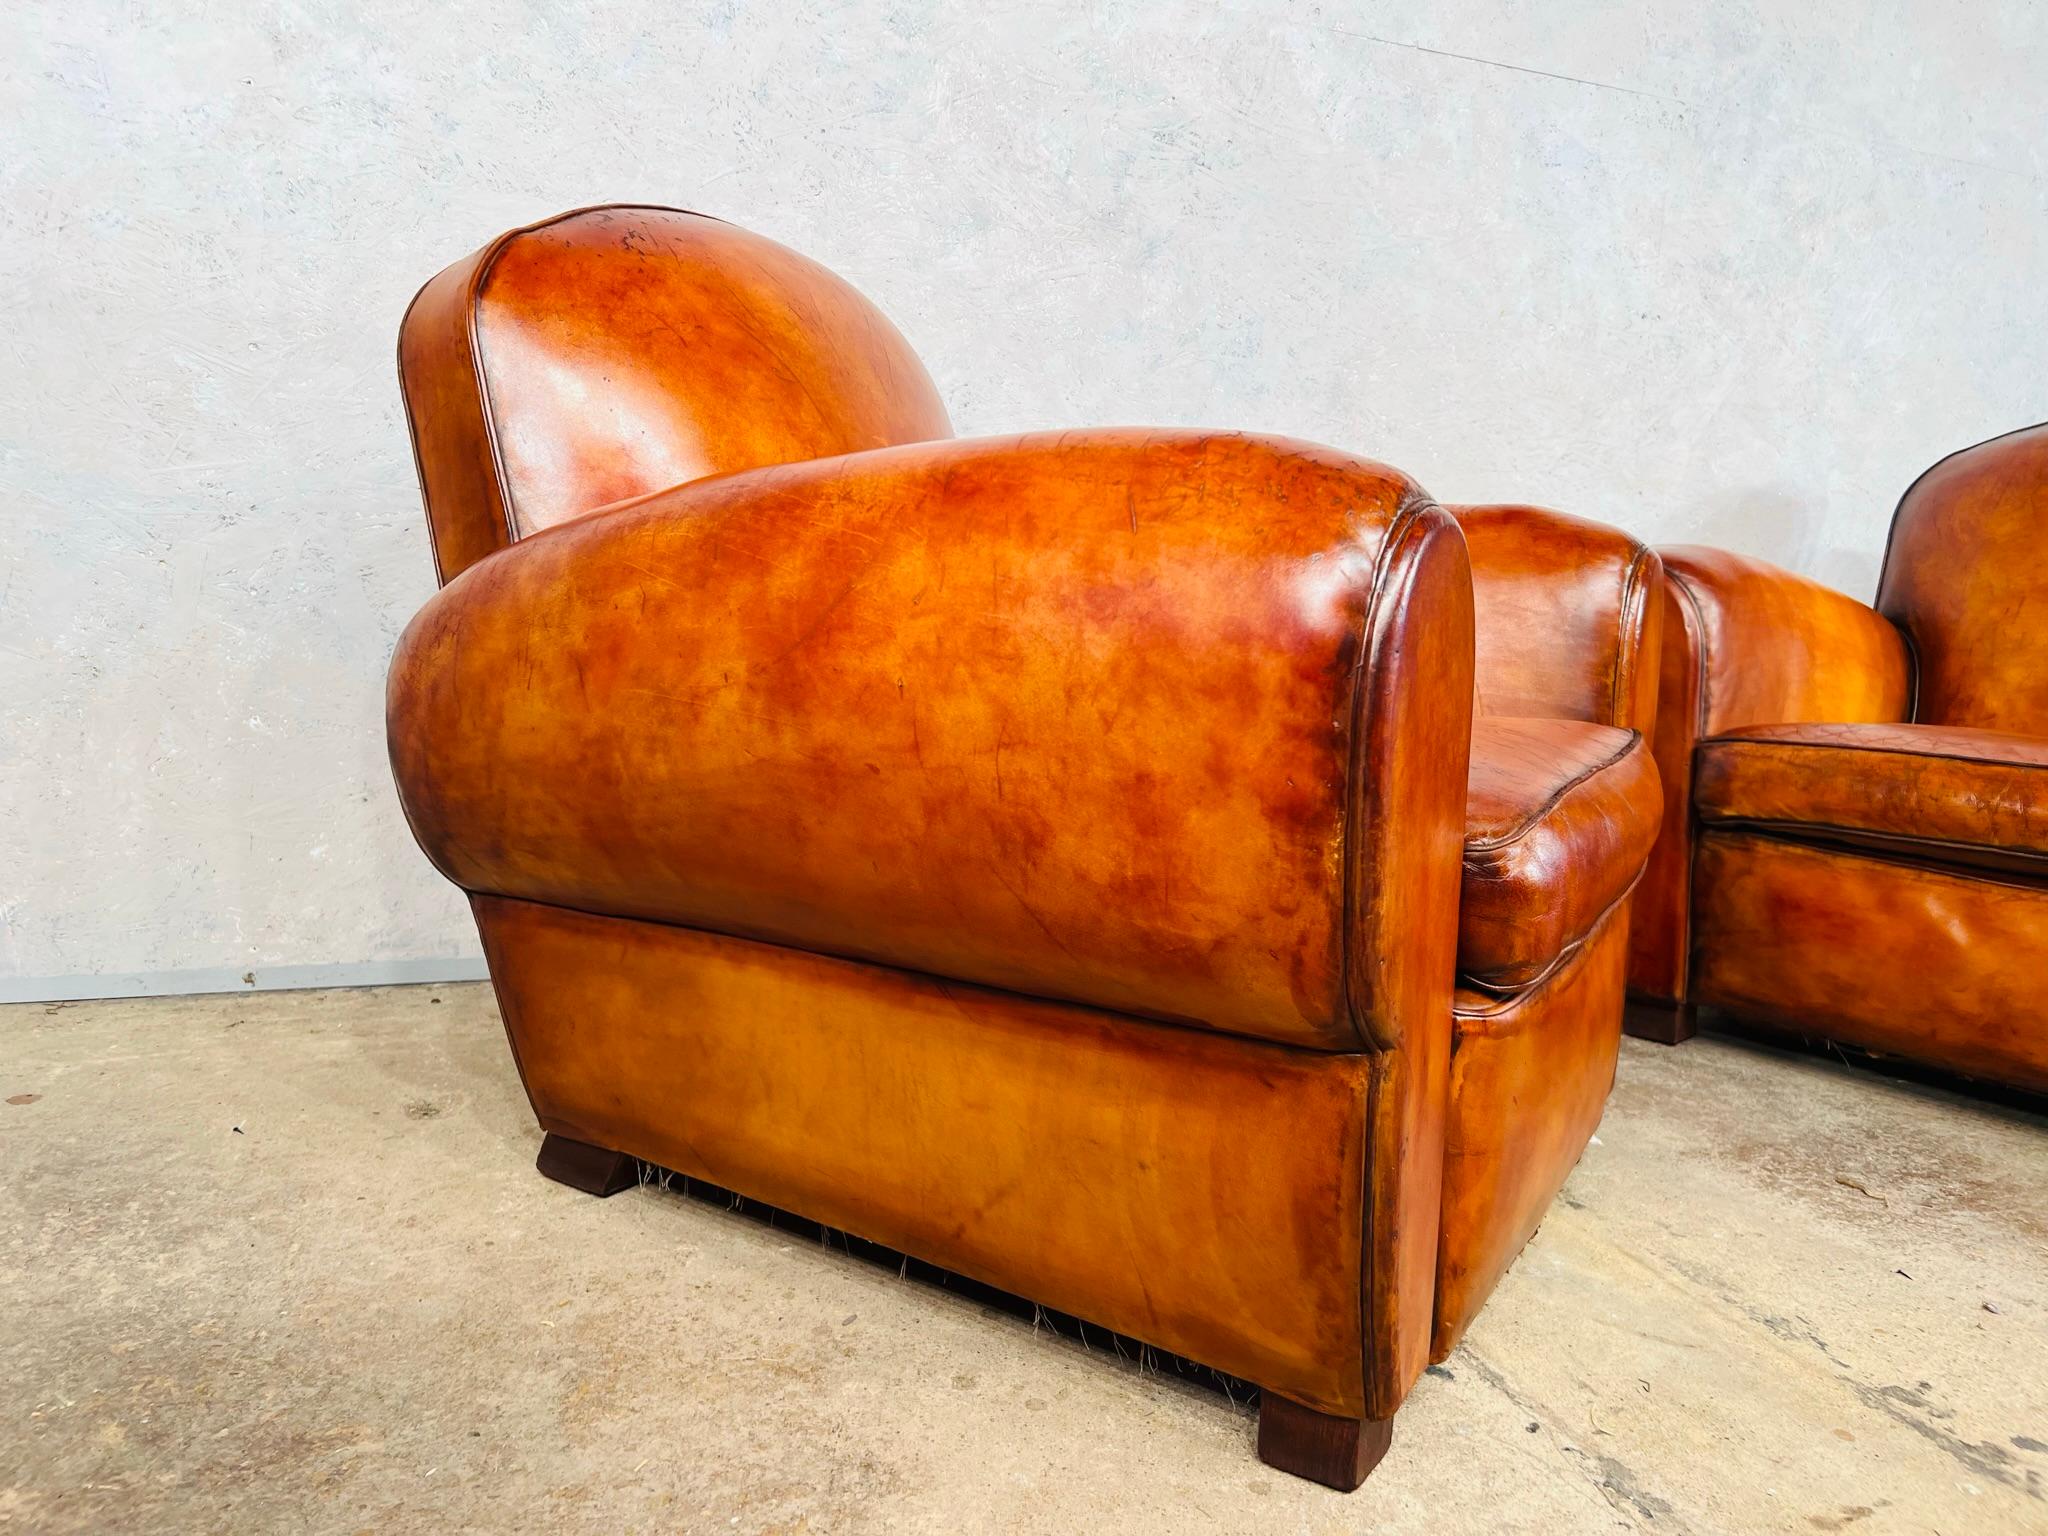 Stunning Pair of Leather French Club Chairs circa 1930 Patinated Cognac Color For Sale 1